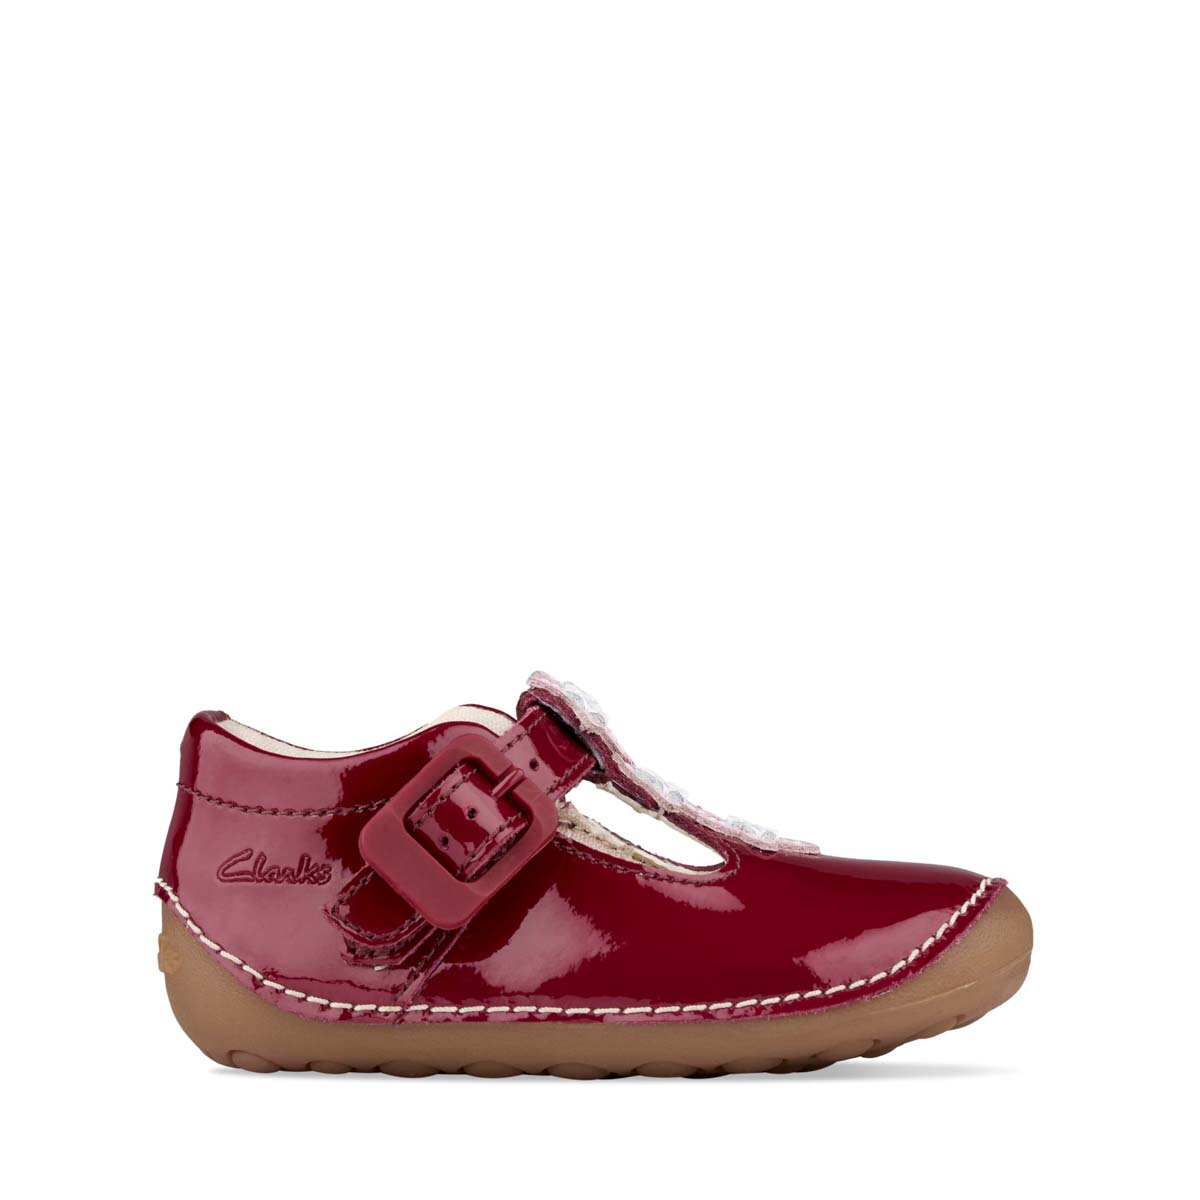 clarks shoes red patent